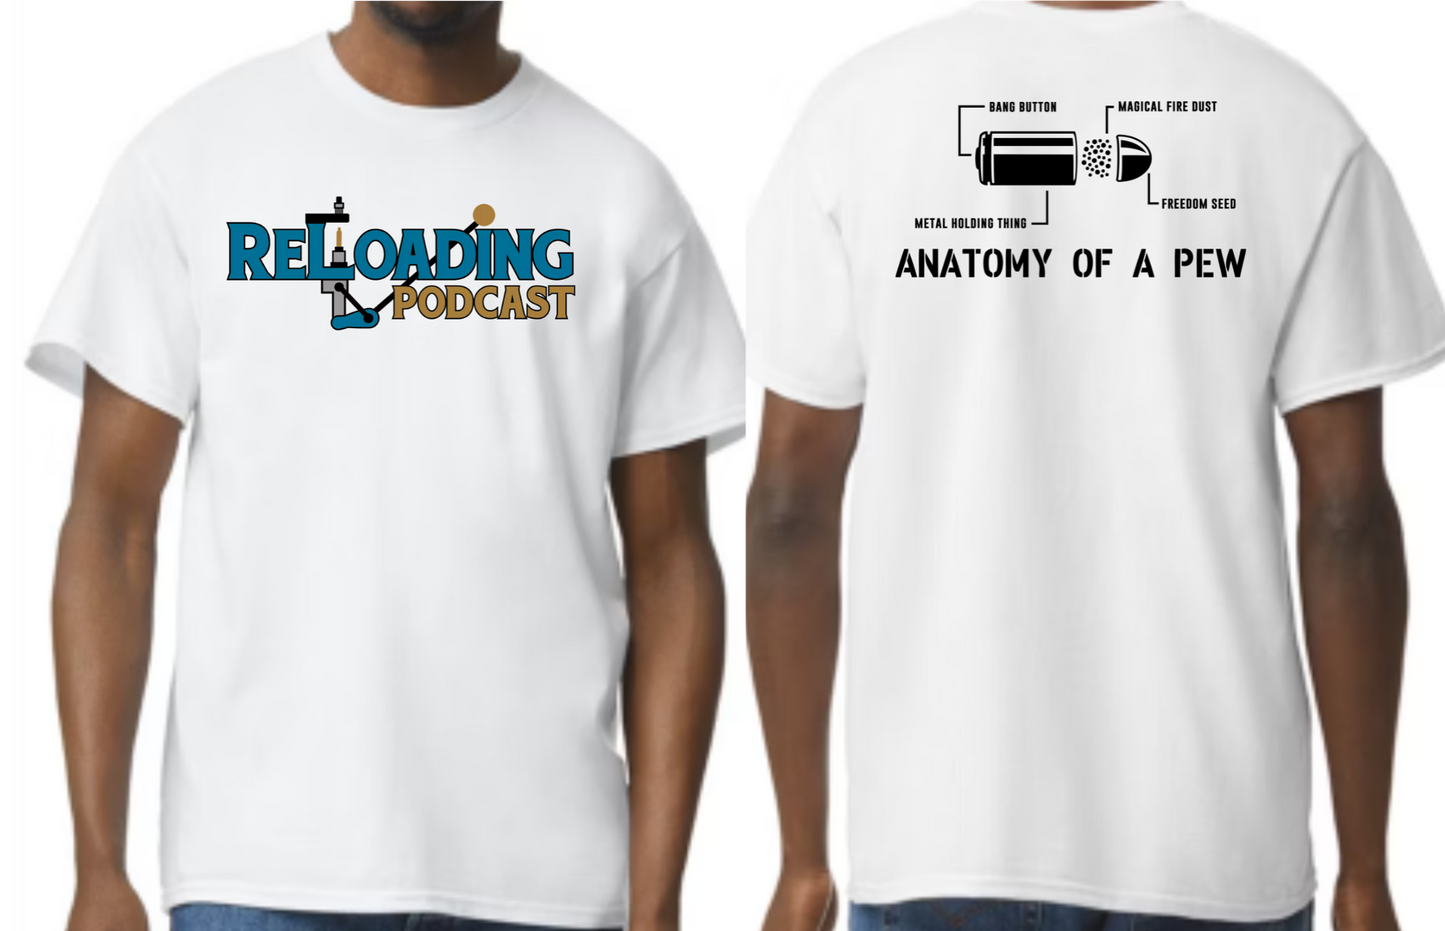 Reloading Podcast Anatomy of a Pew t-shirt